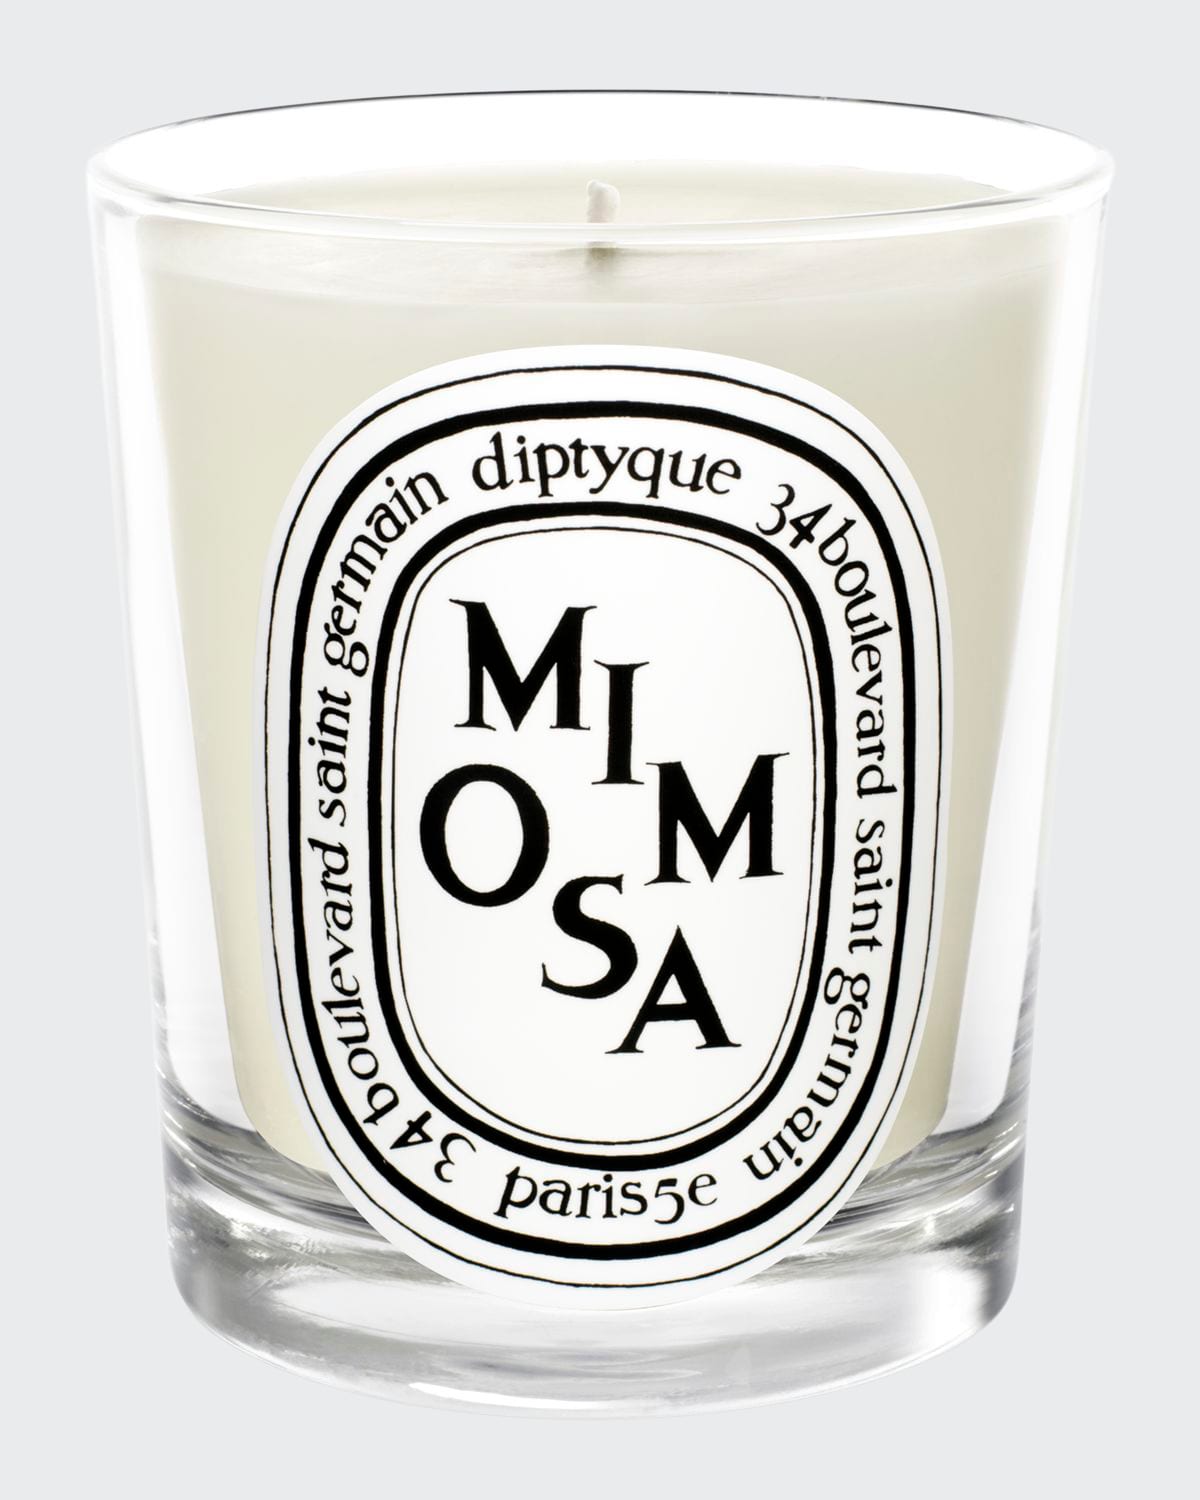 DIPTYQUE Mimosa Scented Candle, 6.5 oz.